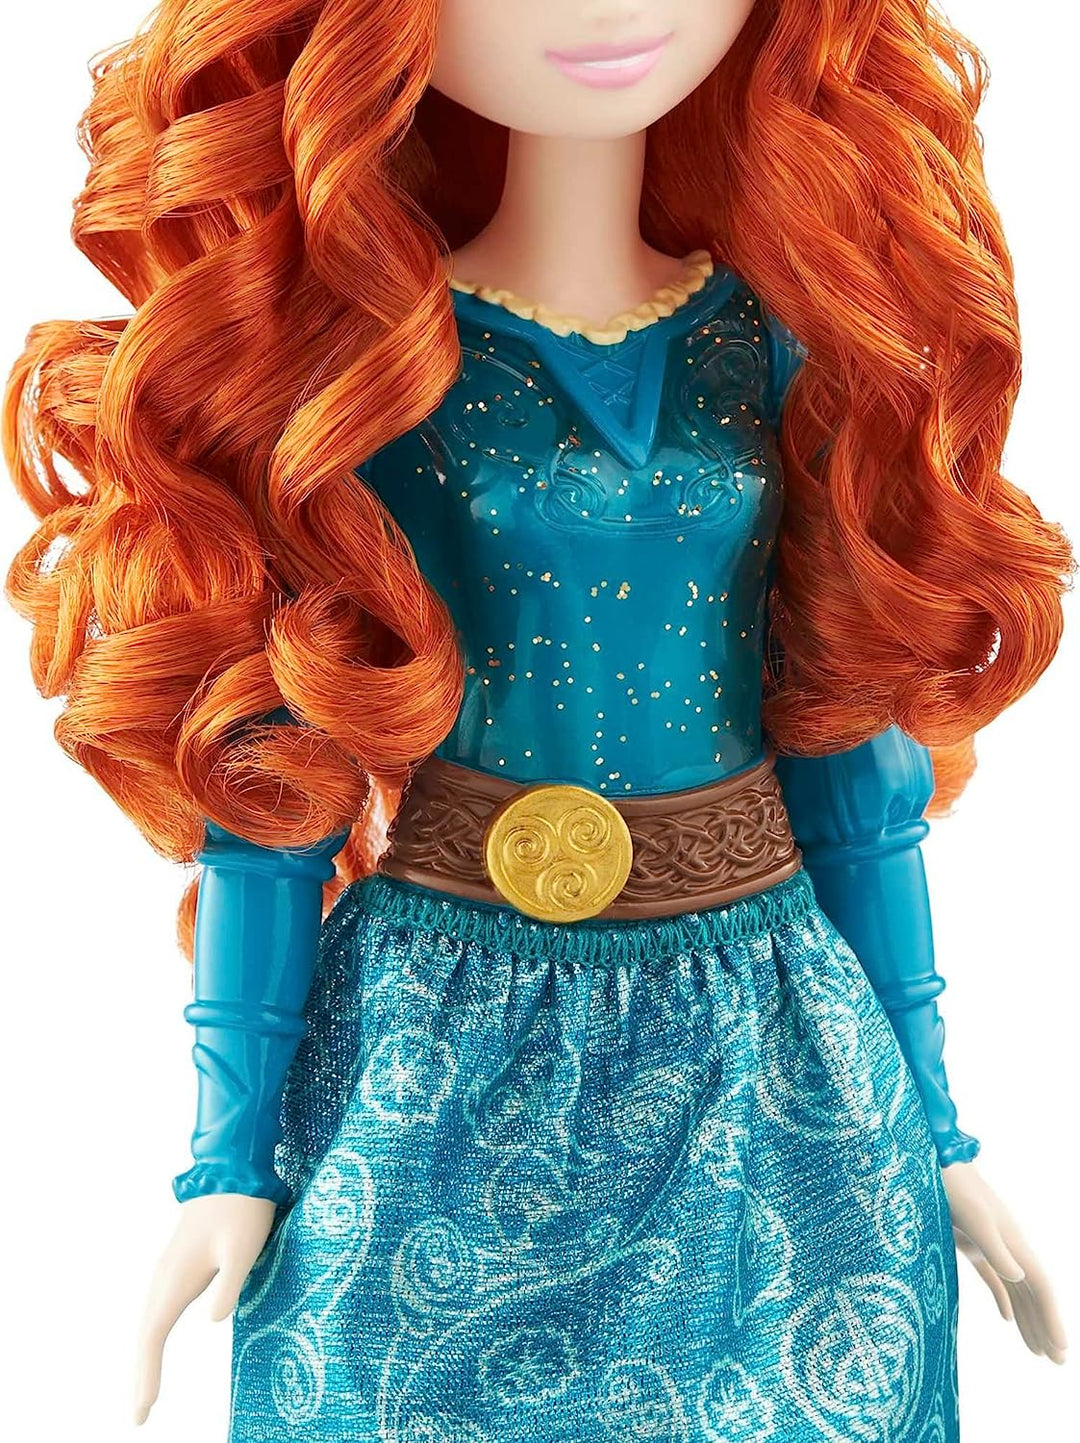 Disney Princess Toys, Merida Posable Fashion Doll with Sparkling Clothing and Accessories